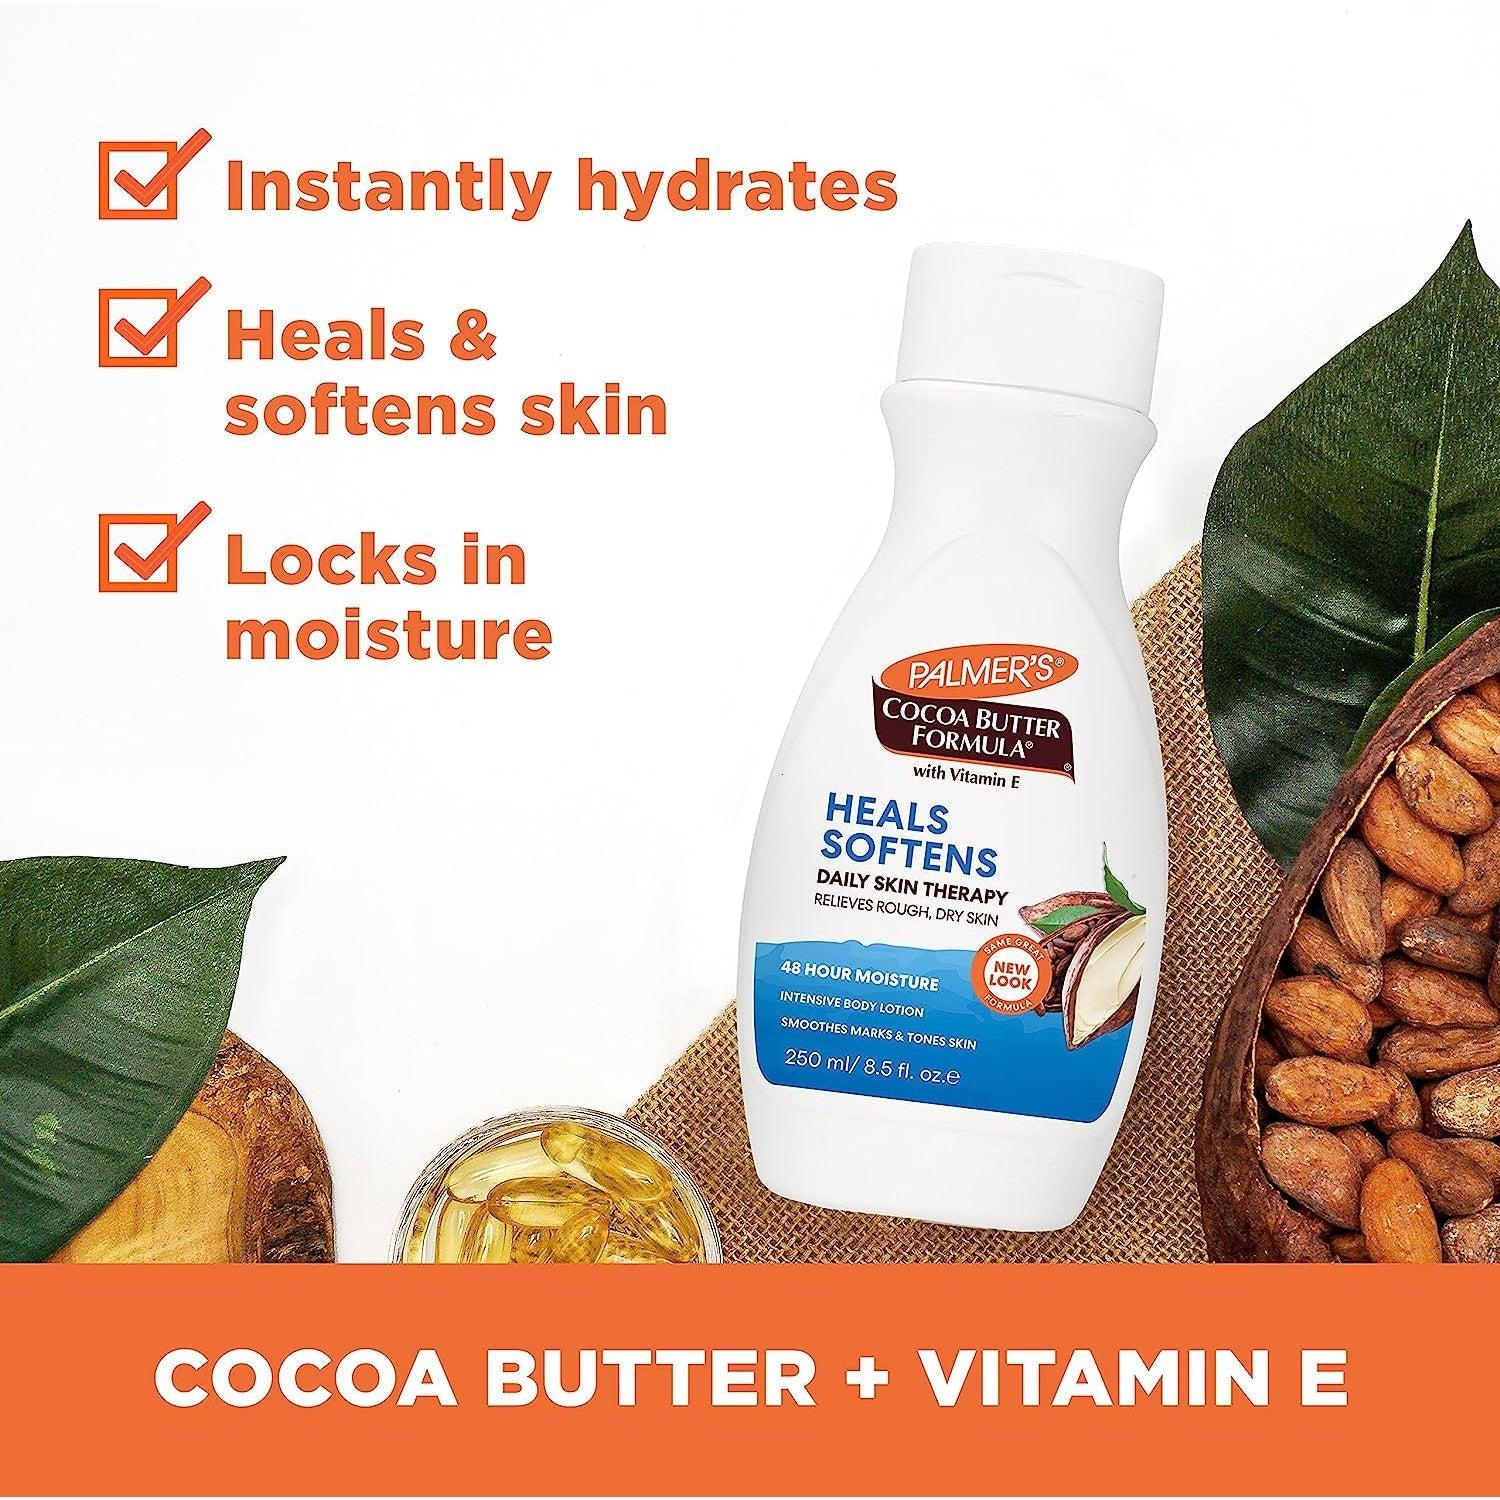 Palmer's Cocoa Butter Formula Moisturizing Lotion 250ml - Healthxpress.ie